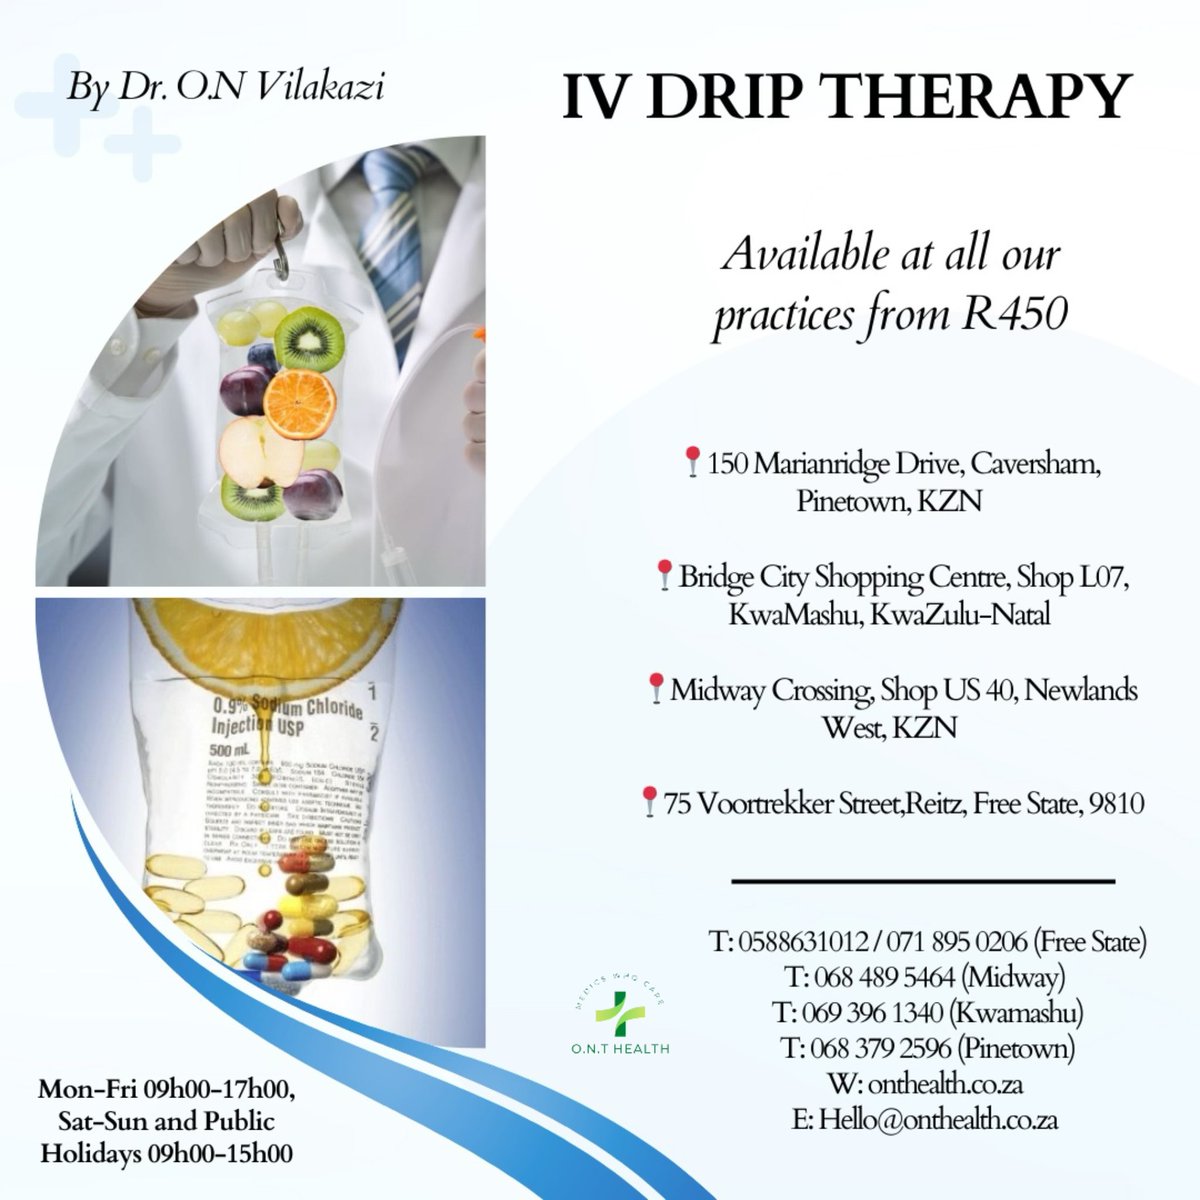 IV Drip Therapy is available at all our practices for only R450 ✨️. 

This is an effective way to deliver nutrients, vitamins, and medications to the body because this technique bypasses the digestive system .

We are based at: 
📍150 Marianridge Drive, Caversham, Pinetown, KZN